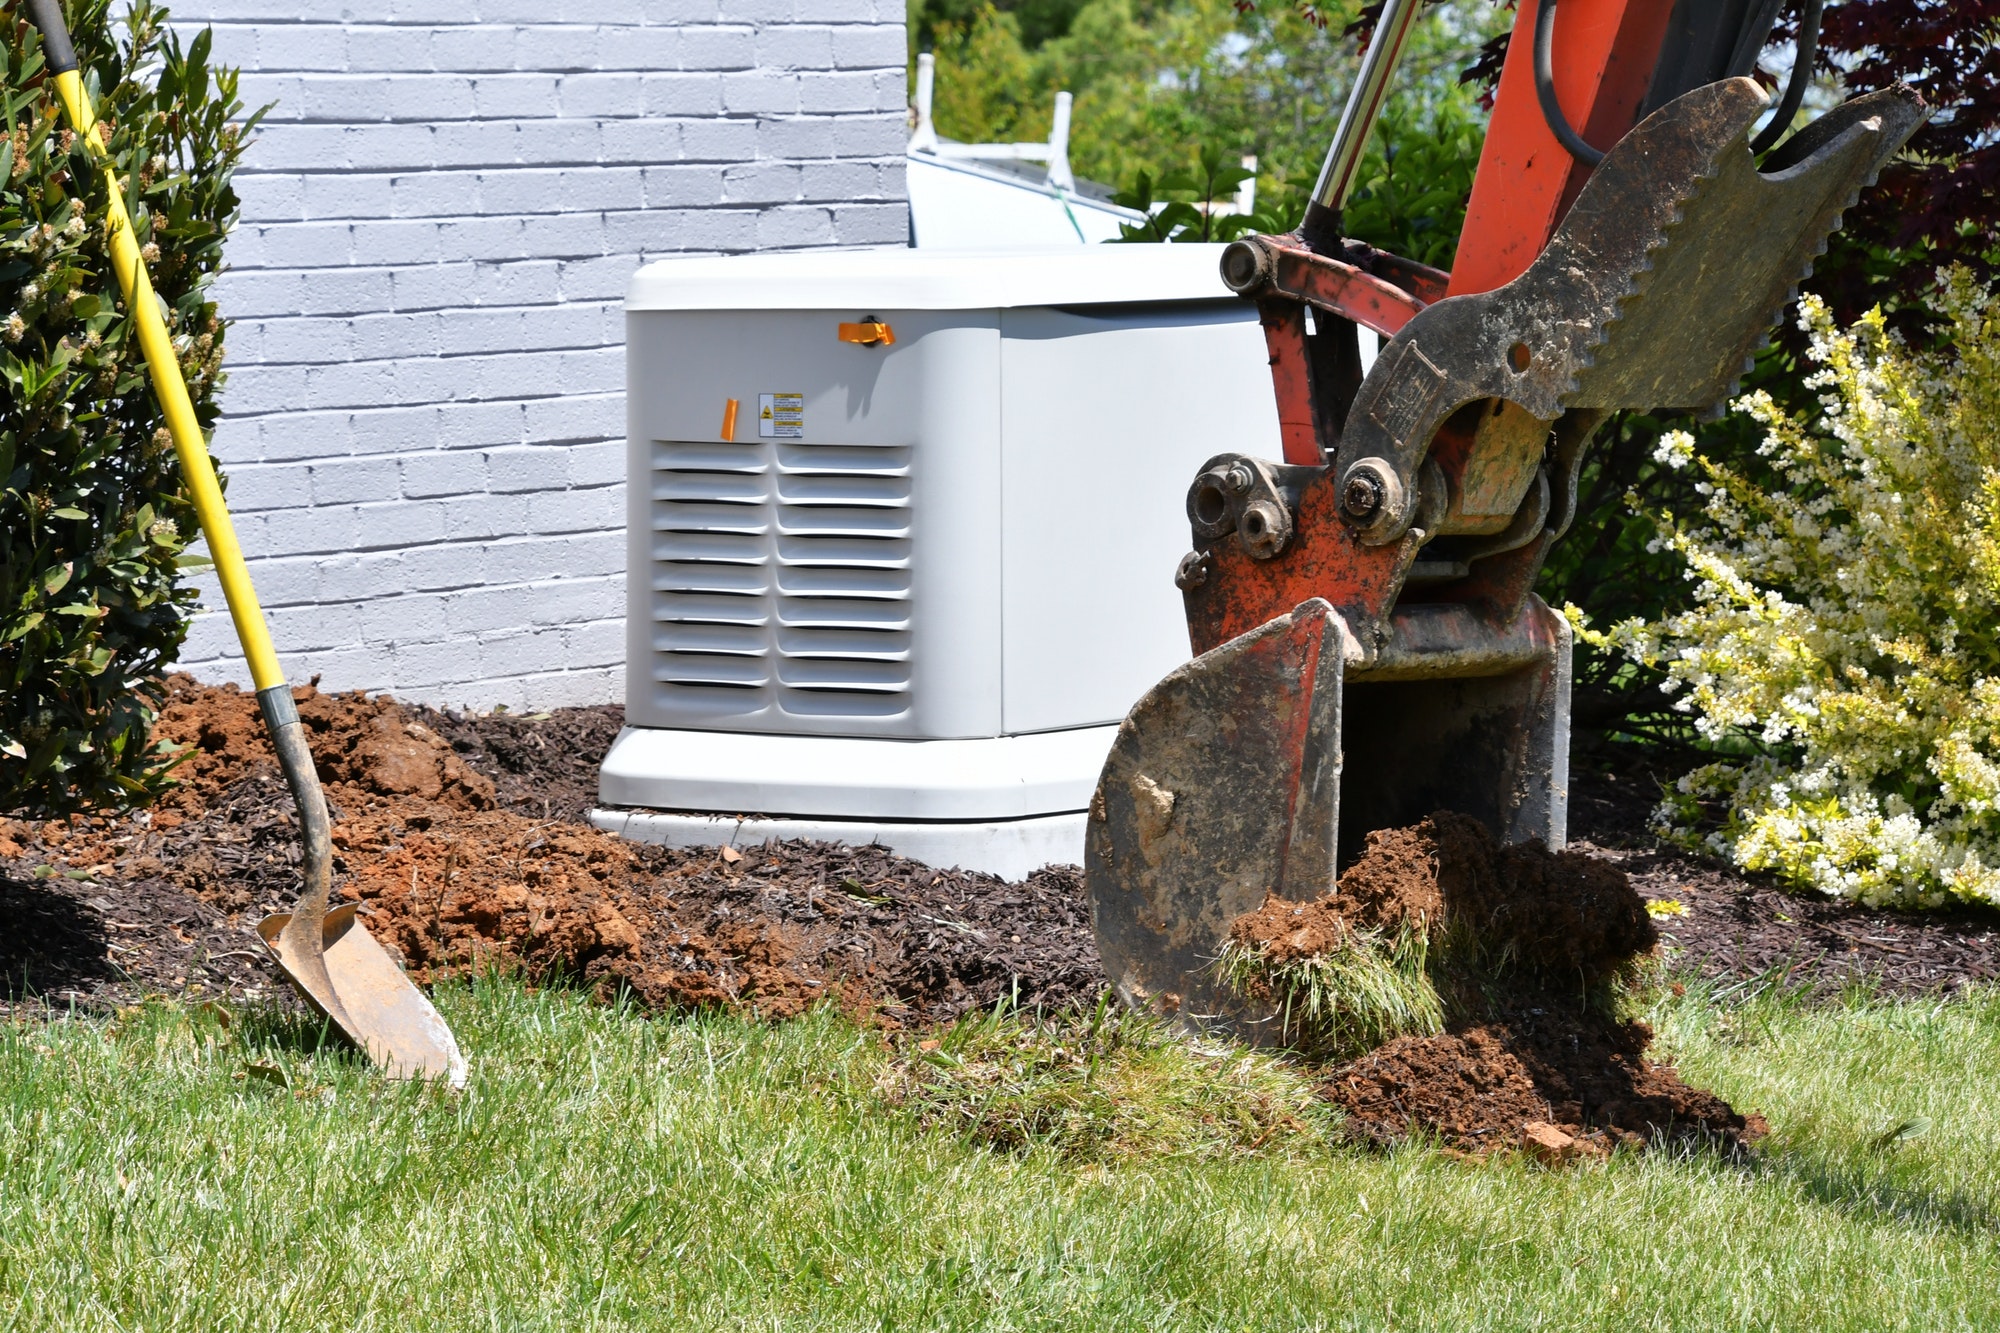 Backhoe digging dirt in lawn to install electrical & gas lines for house generator Scoopful soil sod